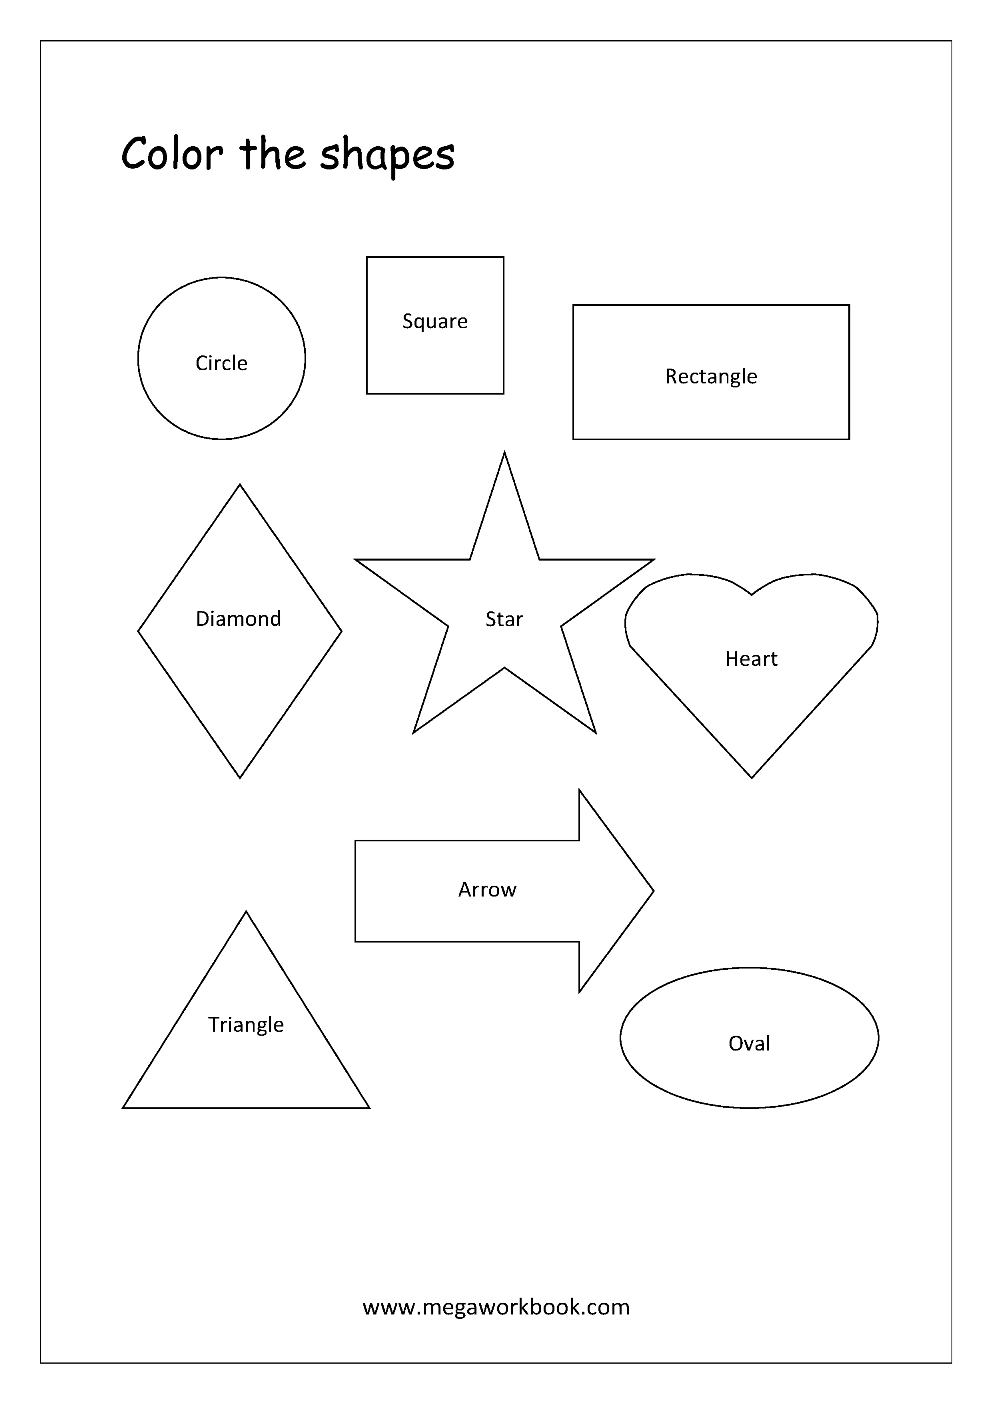 free printable shapes worksheets tracing simple shapes pre writing skills worksheets for preschool kindergarten 2d shapes circle square triangle rectangle semicircle etc megaworkbook